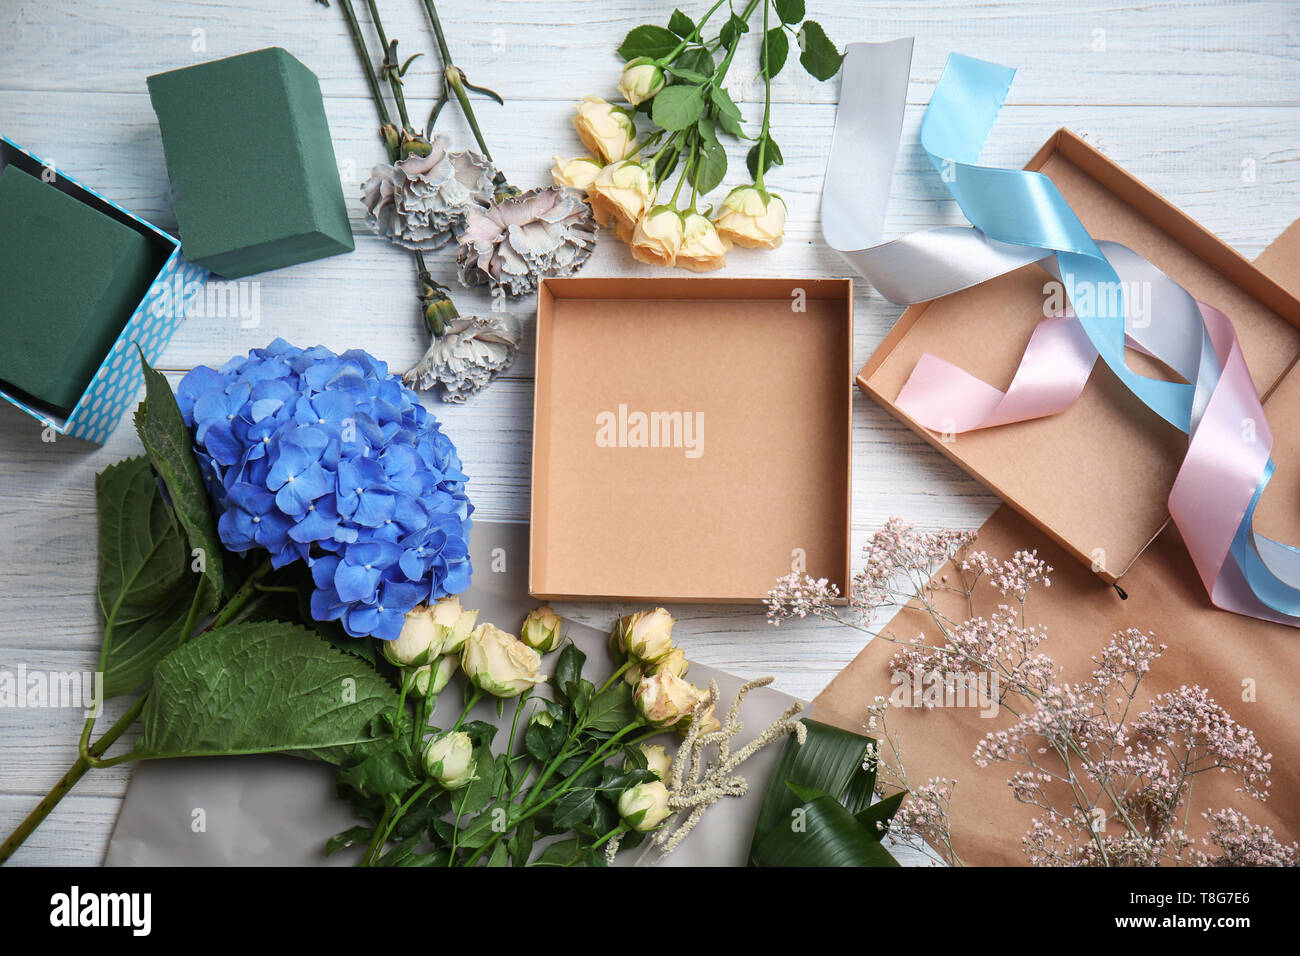 Florist's workplace with empty gift box and beautiful flowers on table Stock Photo